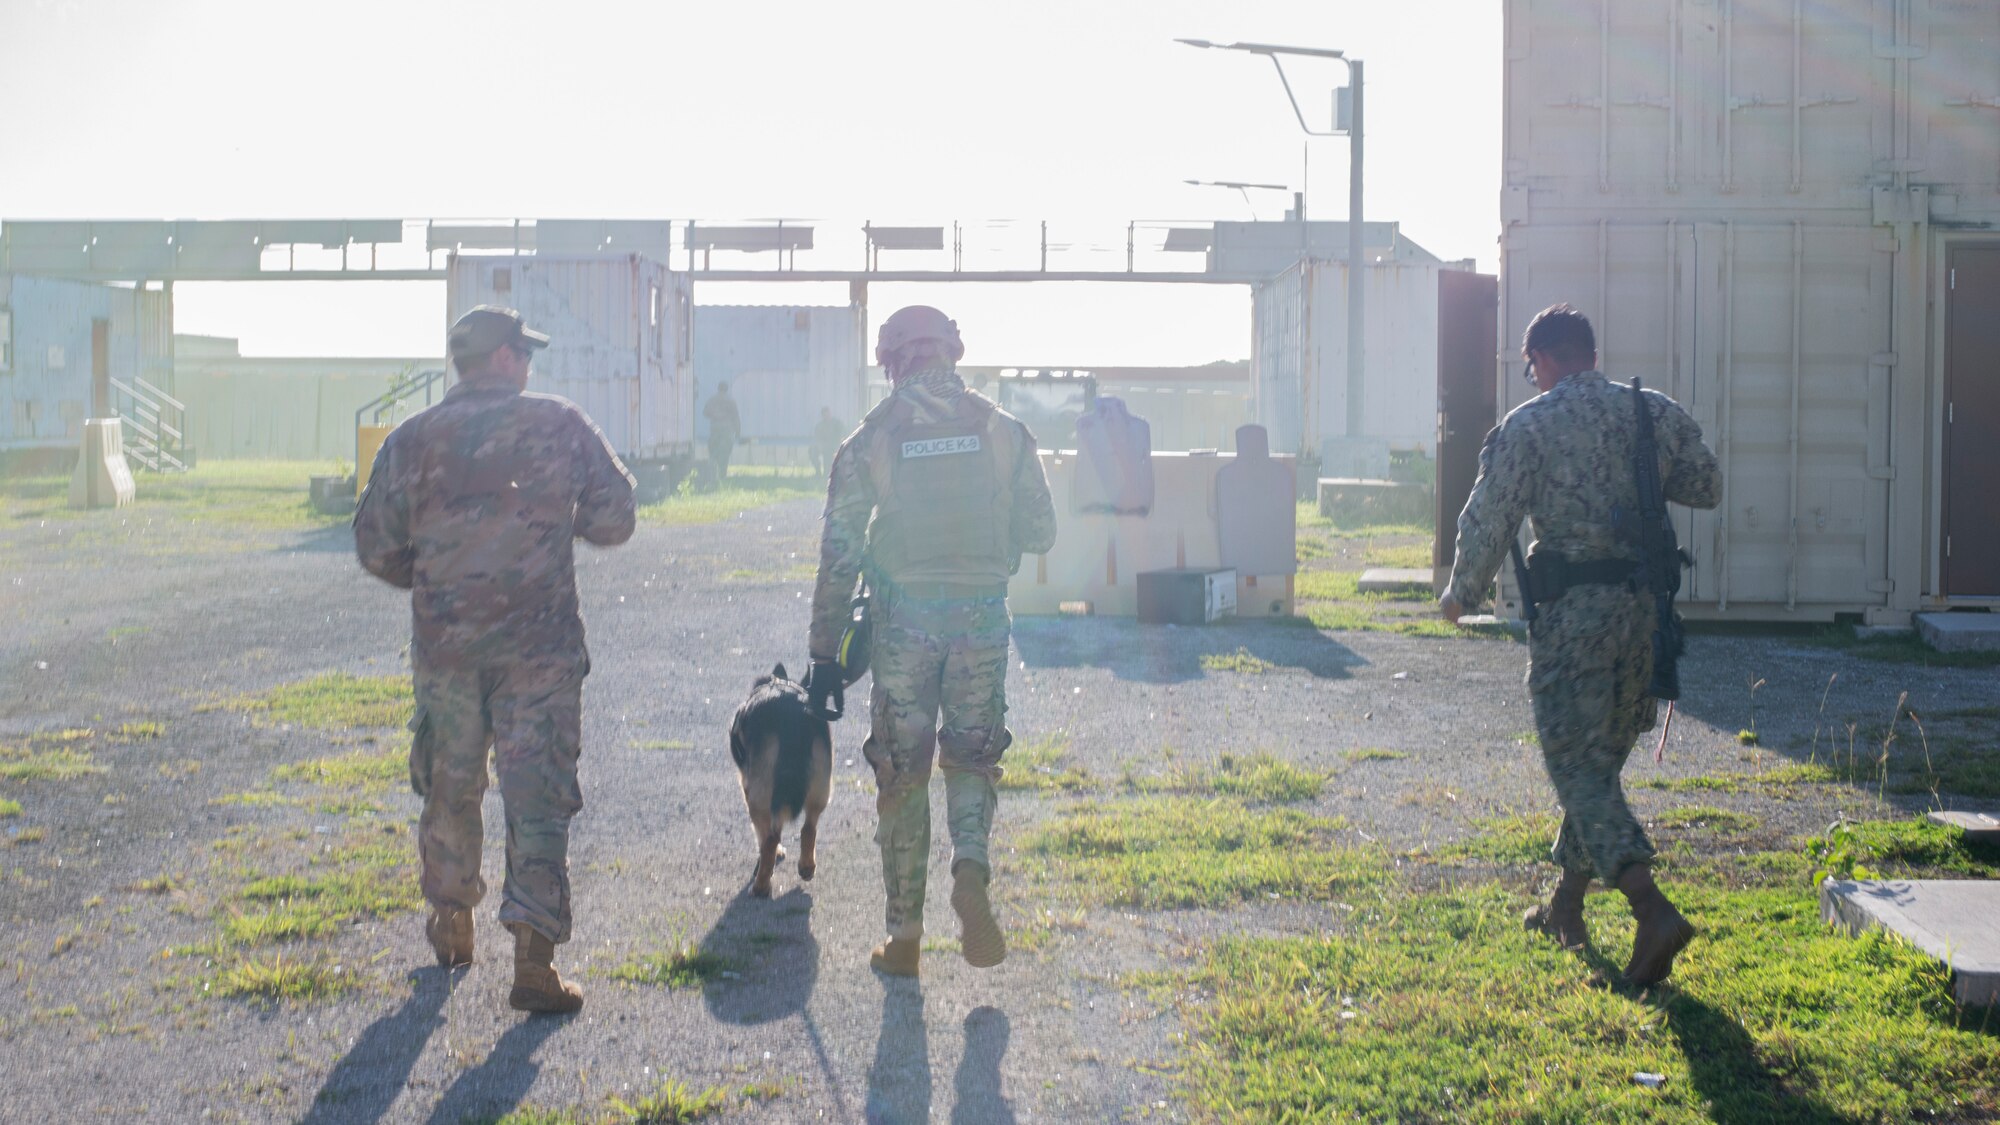 Sailors, Marines, and Airmen finish up an urban training exercise on Andersen Air Force Base, Guam Nov. 20. The service members exchanged MWD techiques to enhance joint mission effectivness. (U.S. Air Force photo by Staff Sgt. Nicholas Crisp)